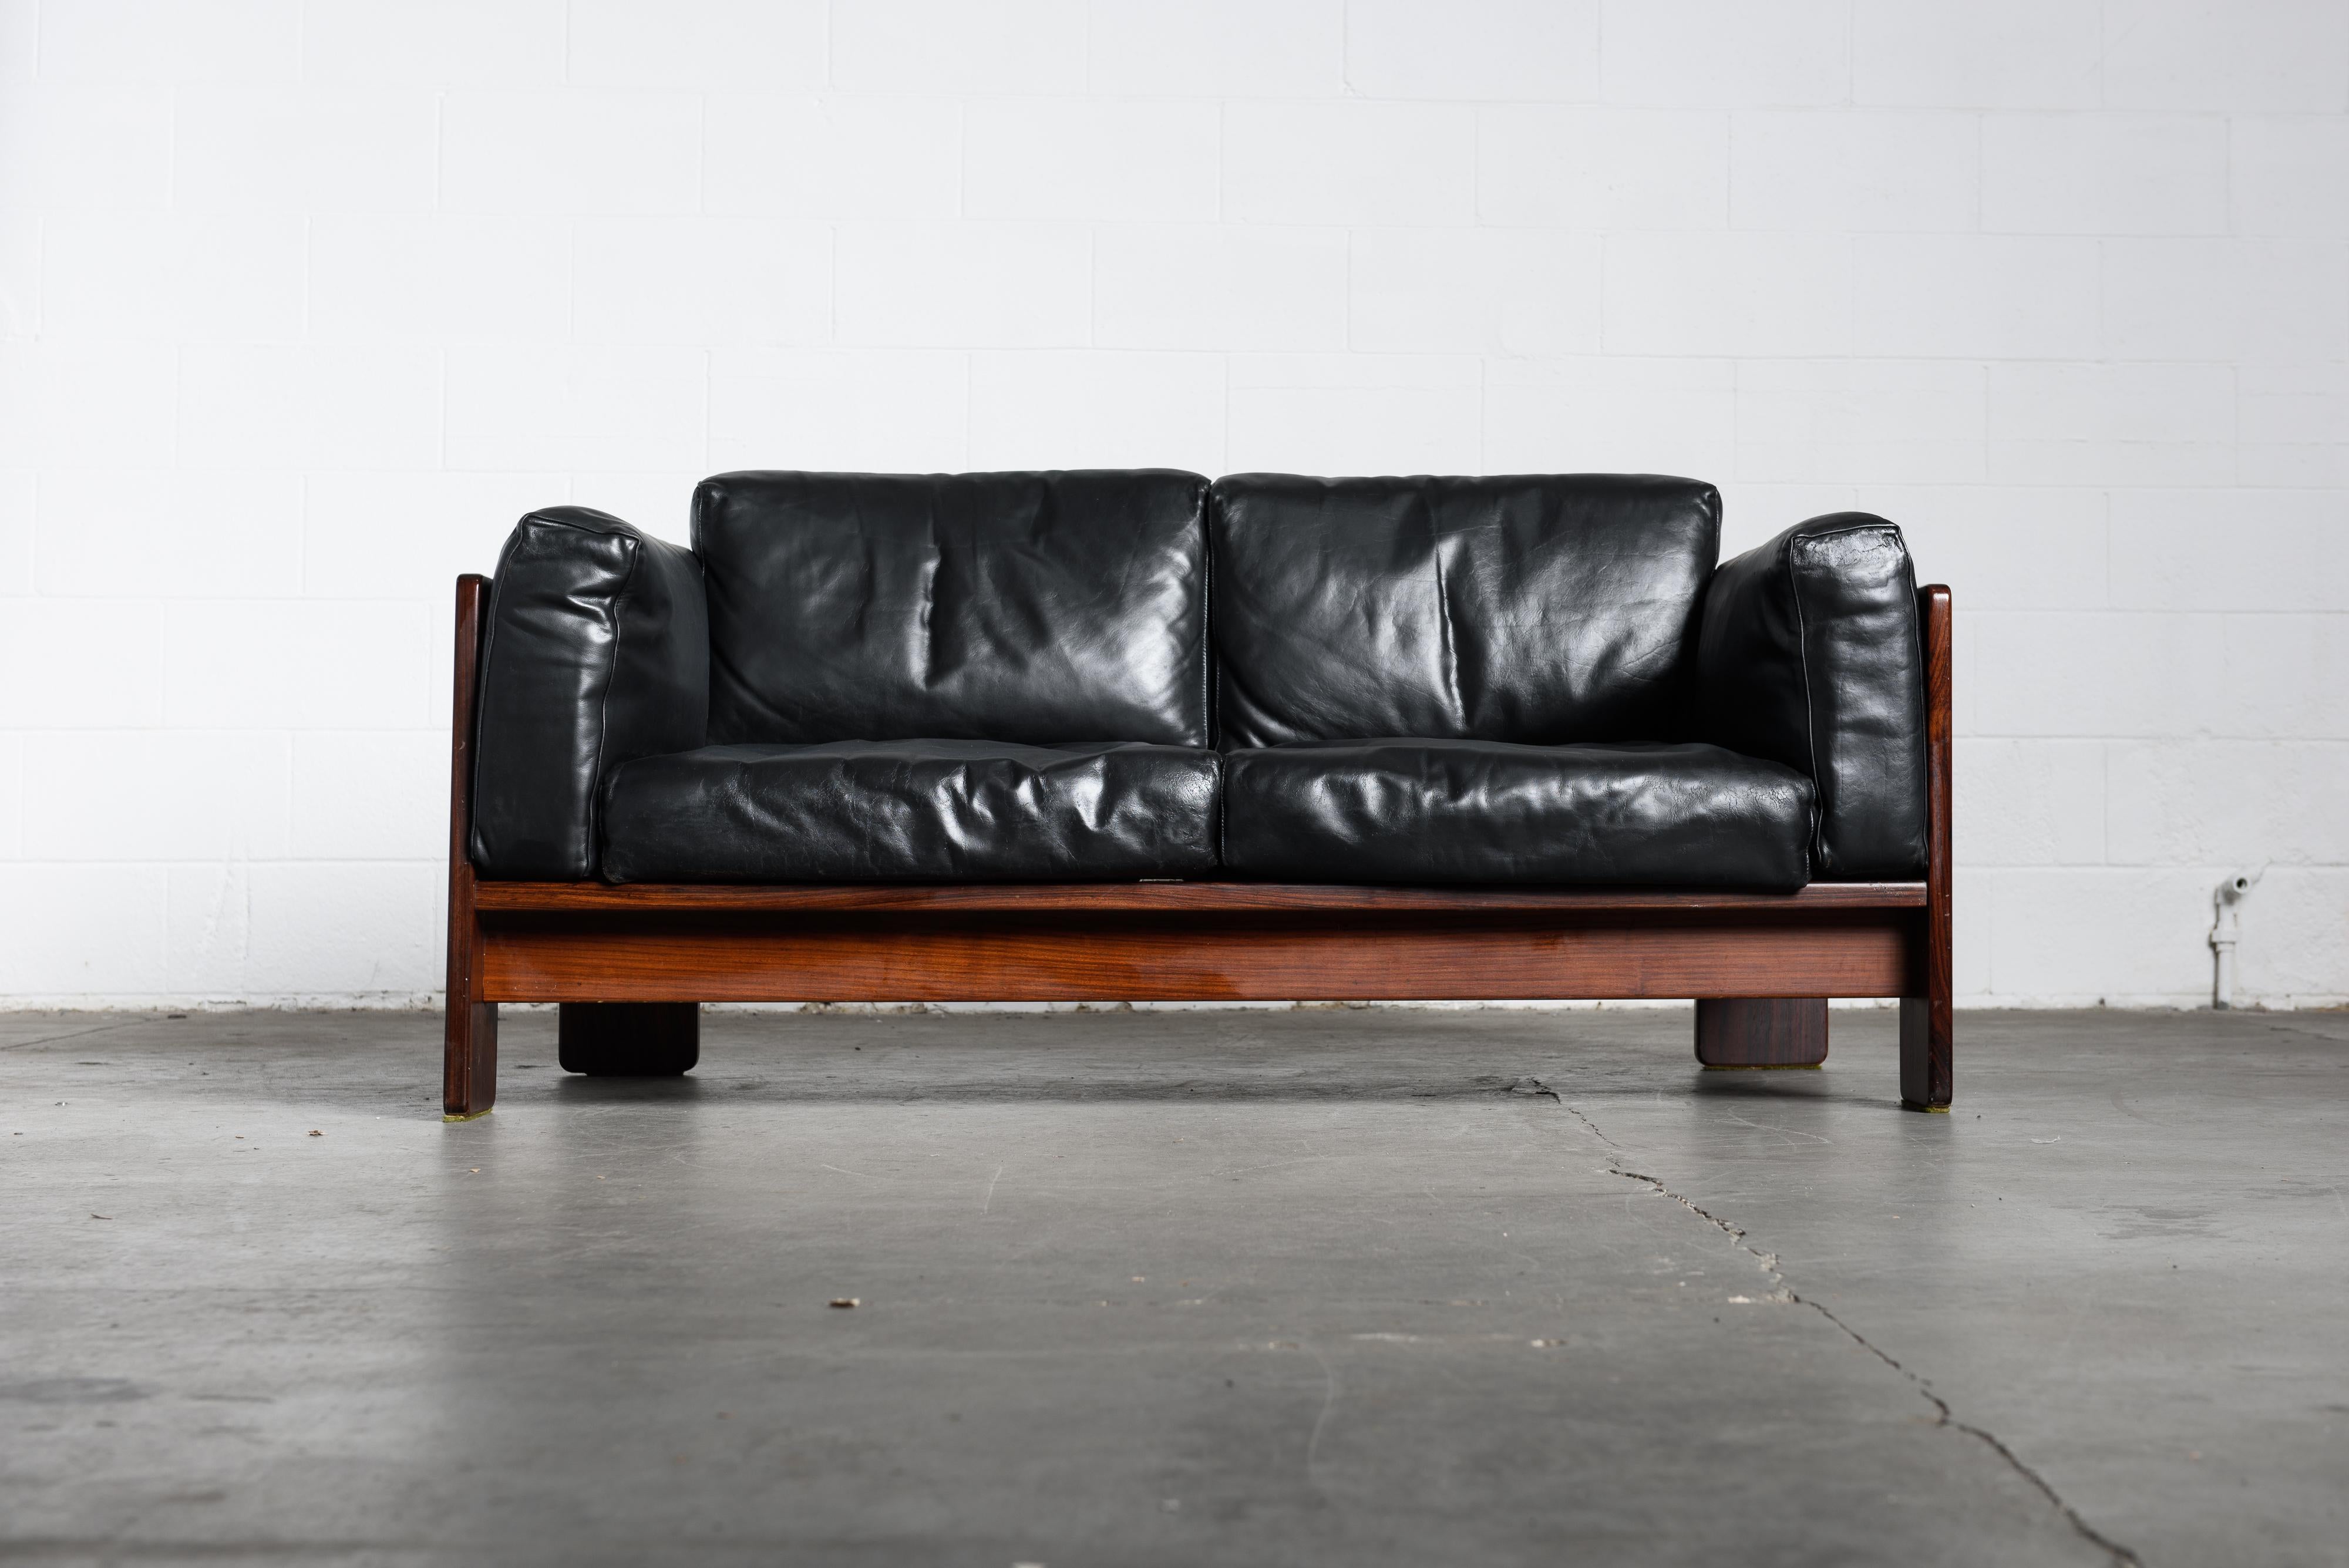 Highly sought after pair of black leather and Brazilian Rosewood 'Bastiano' loveseat sofas by Afra and Tobia Scarpa for Gavina, signed with several Gavina labels. This elegantly crafted sofa has been fabricated from Rosewood which displays a